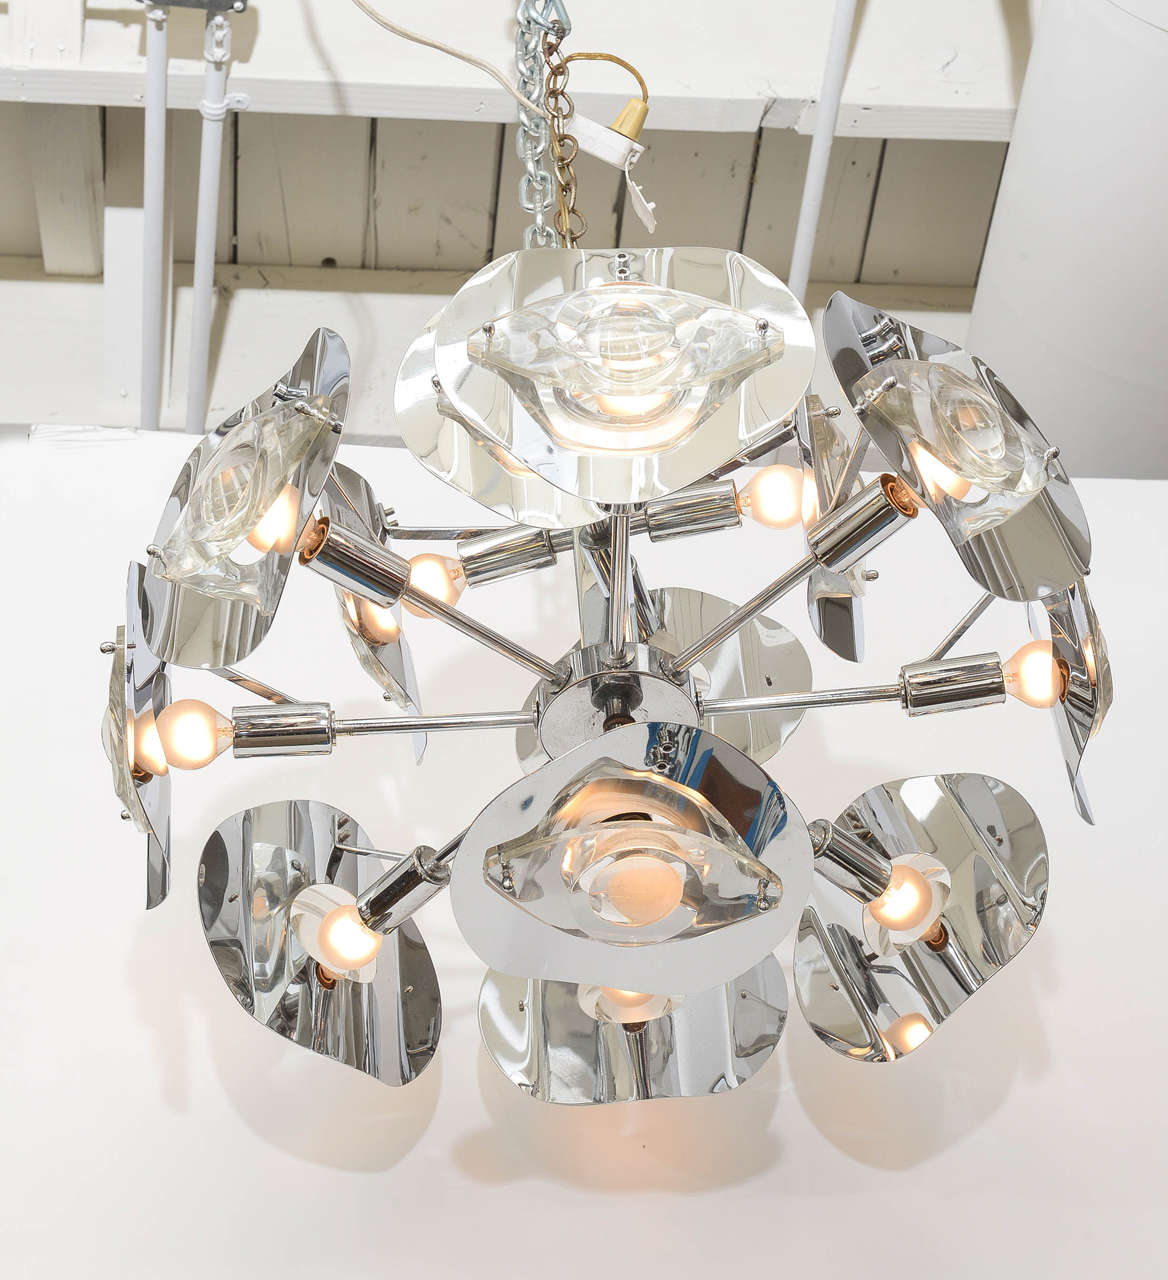 Beautiful Lens chandelier by Italian Designer / Lighting Manufacturer Gaetano Sciolari . This amazing piece dates back to the 1970,s . It's an incredible example of modern lighting of this era . The piece is in very good condition with no damage